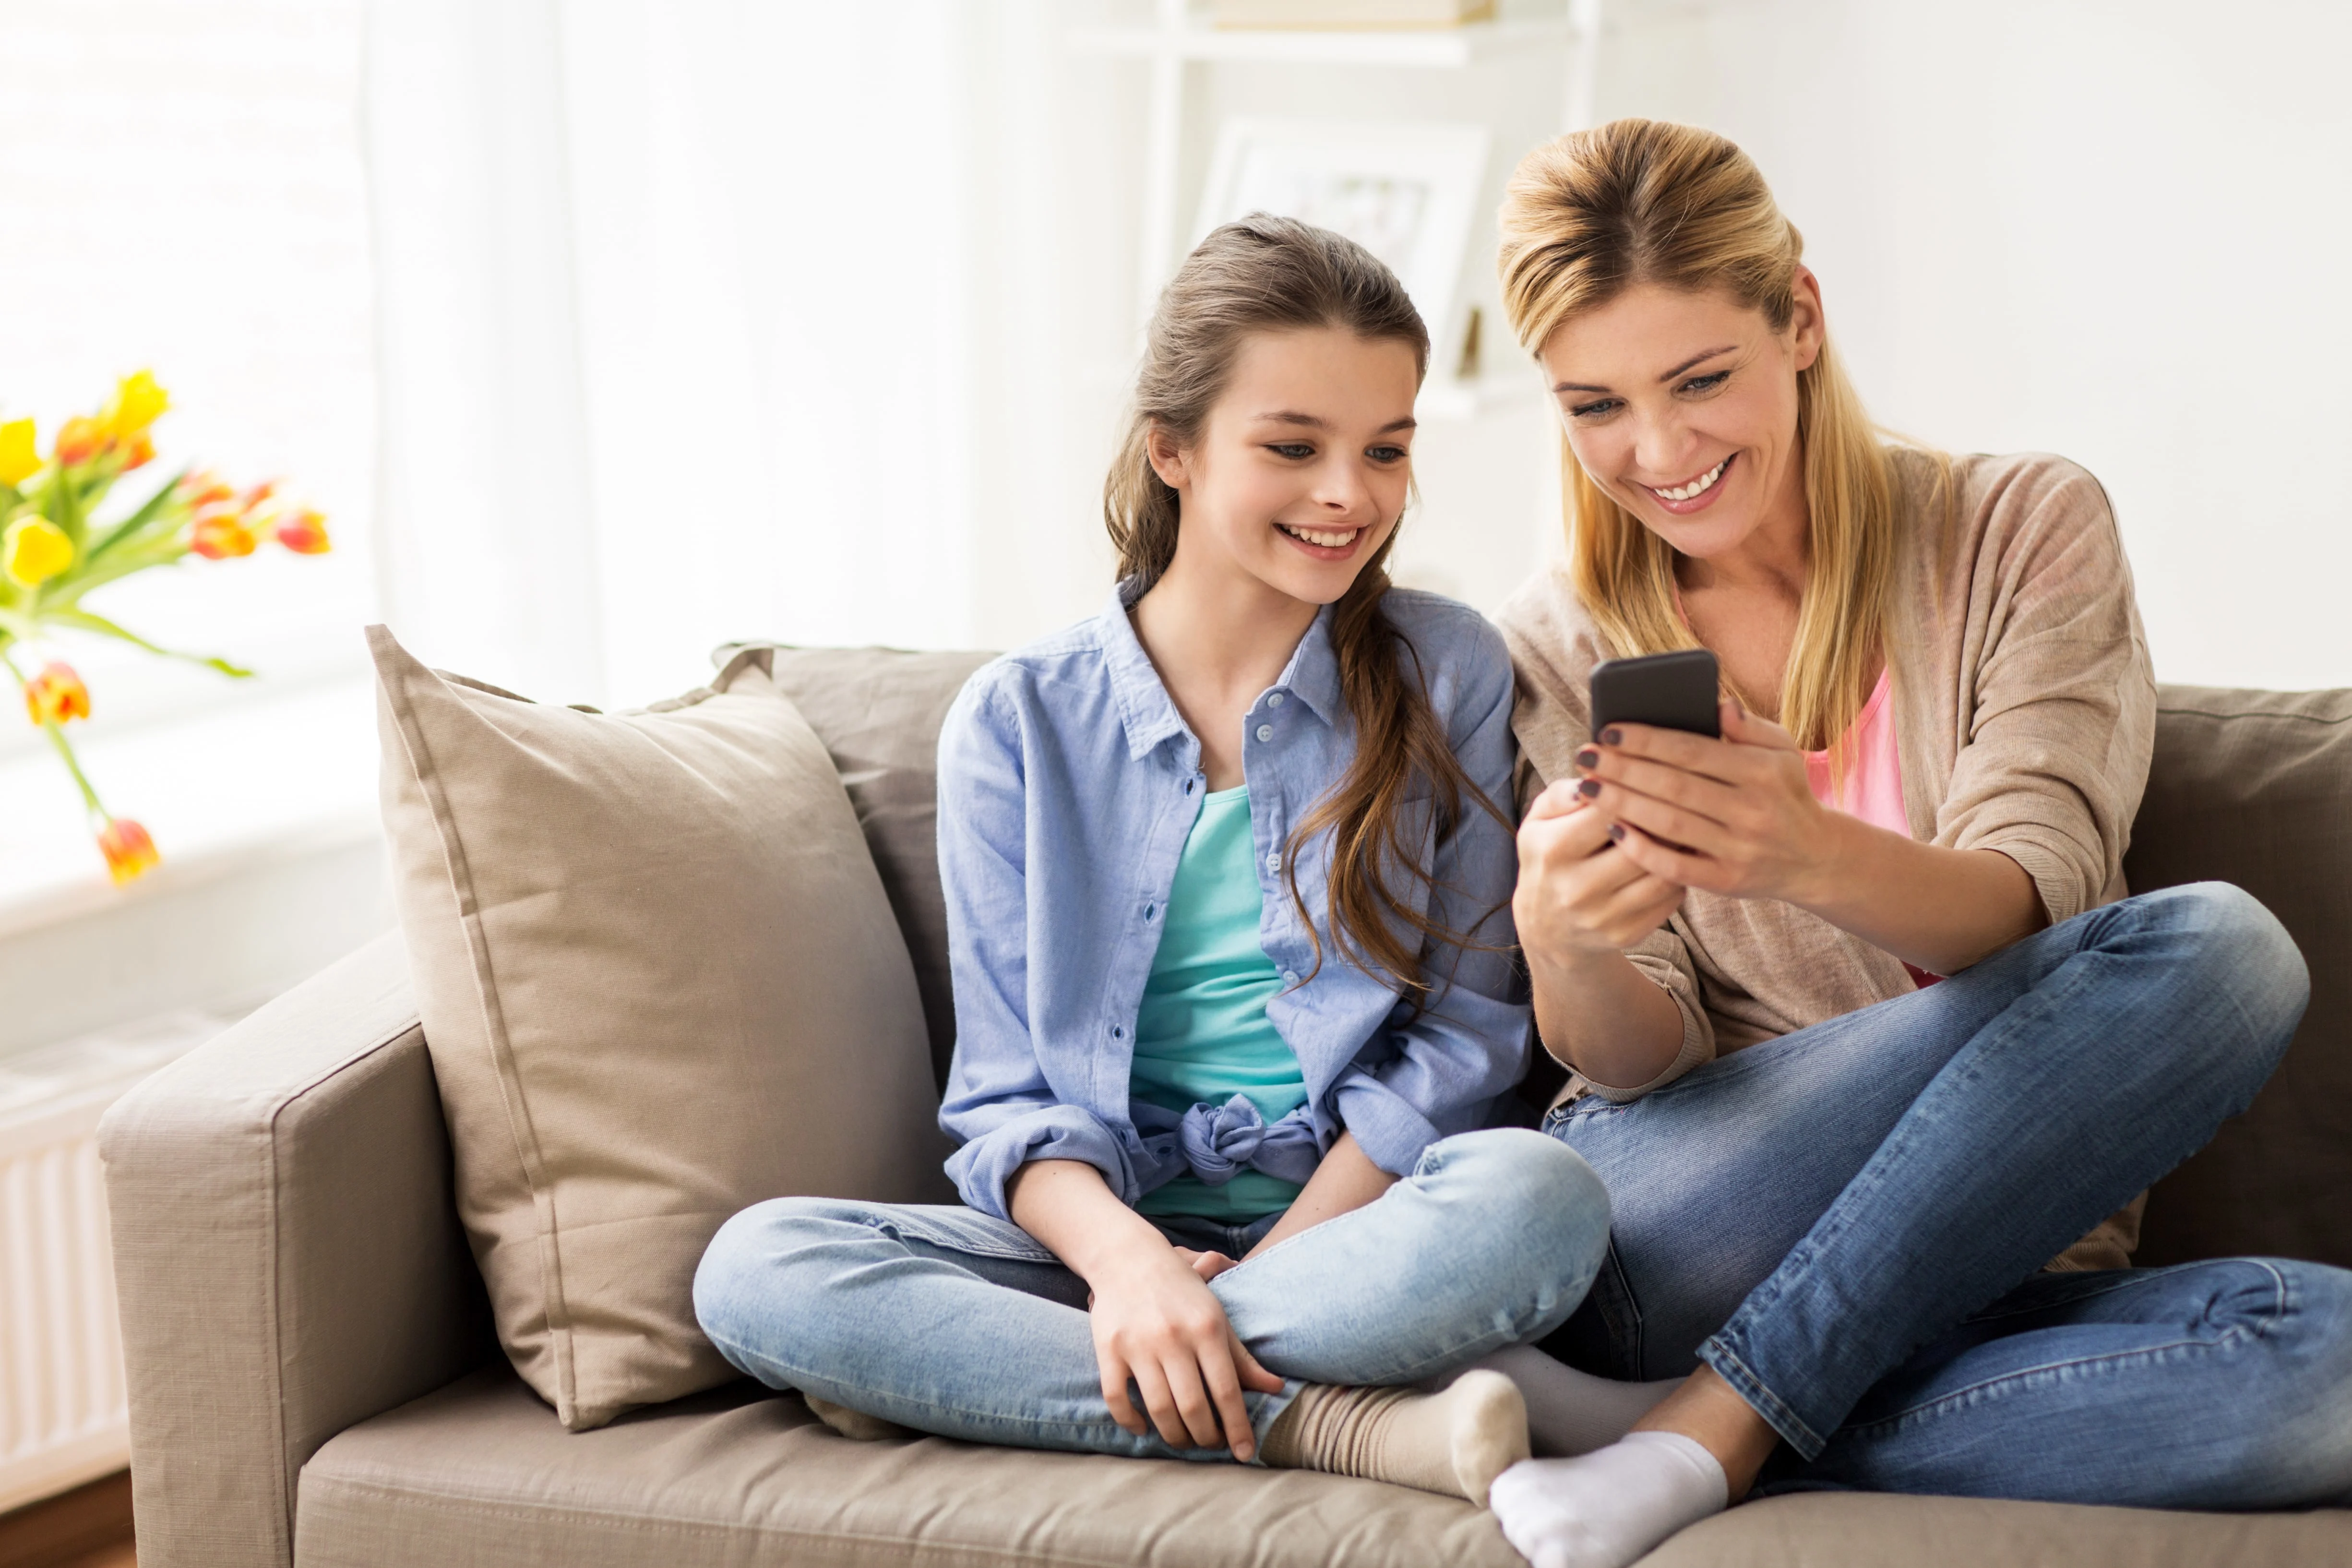 Daughter and mother sitting on a couch and looking at a phone